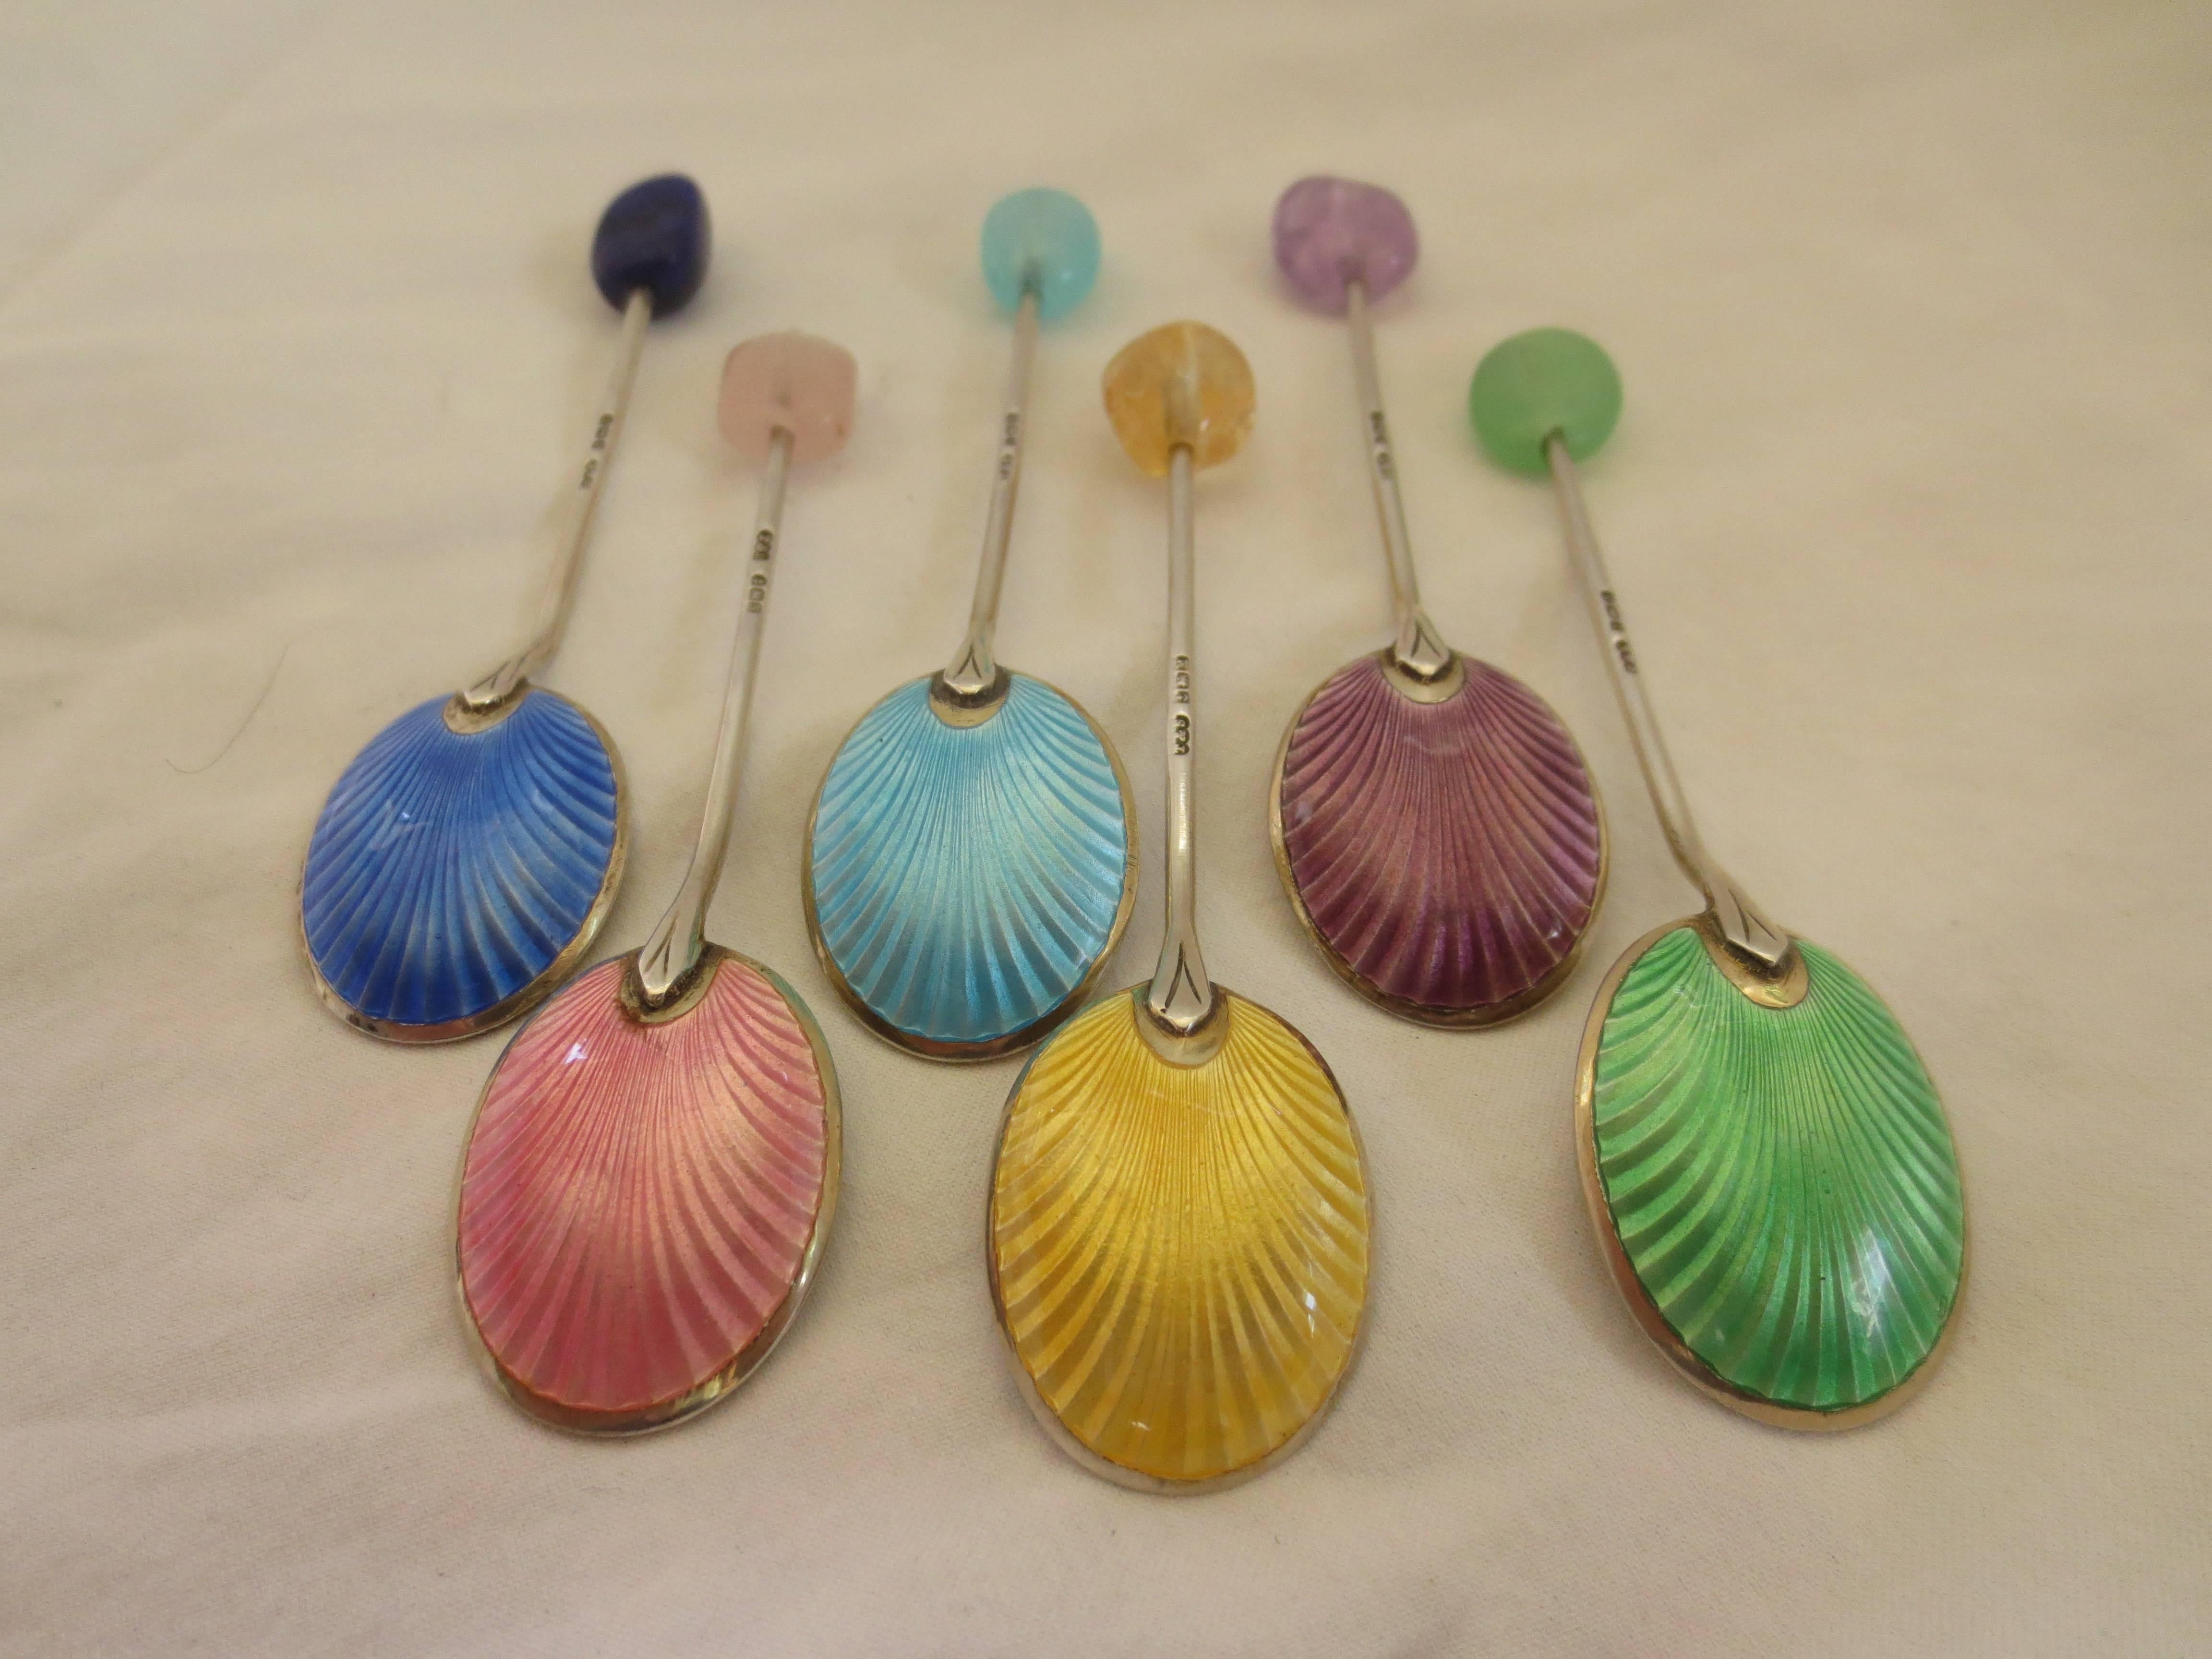 One-of-a-kind Enameled Silver Spoons Refurbished with Semi precious stone beads. 3